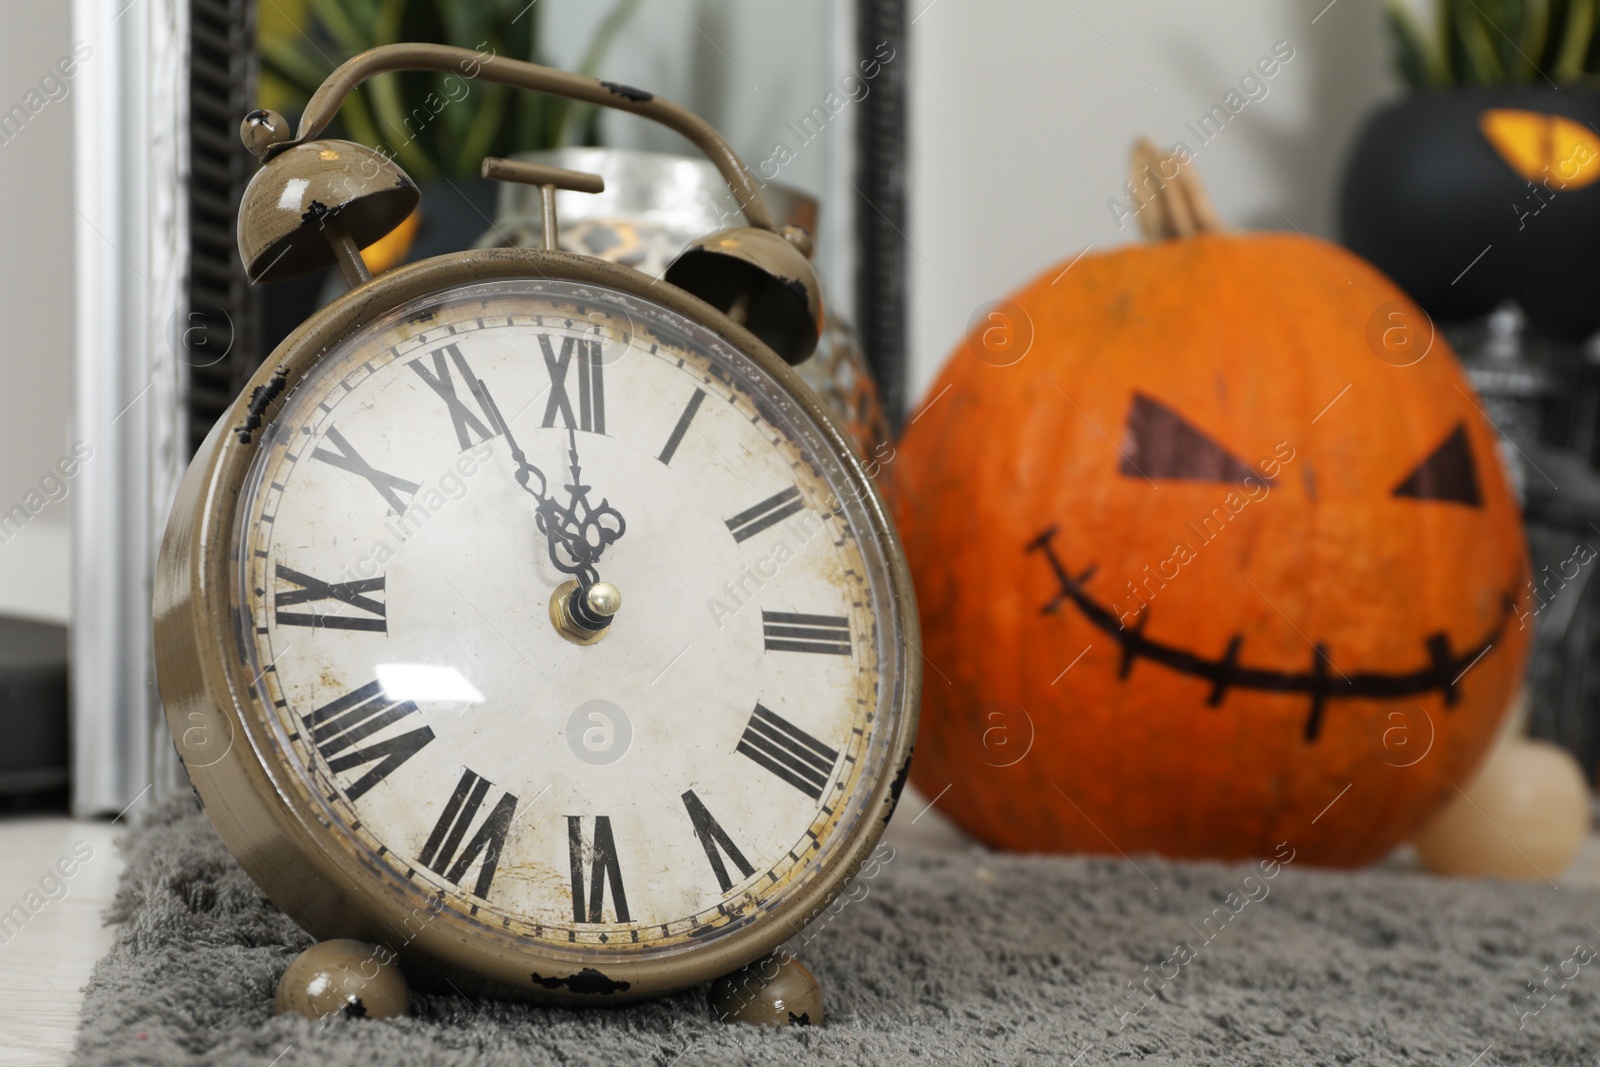 Photo of Old alarm clock and pumpkin with drawn spooky face on rug indoors. Halloween decor